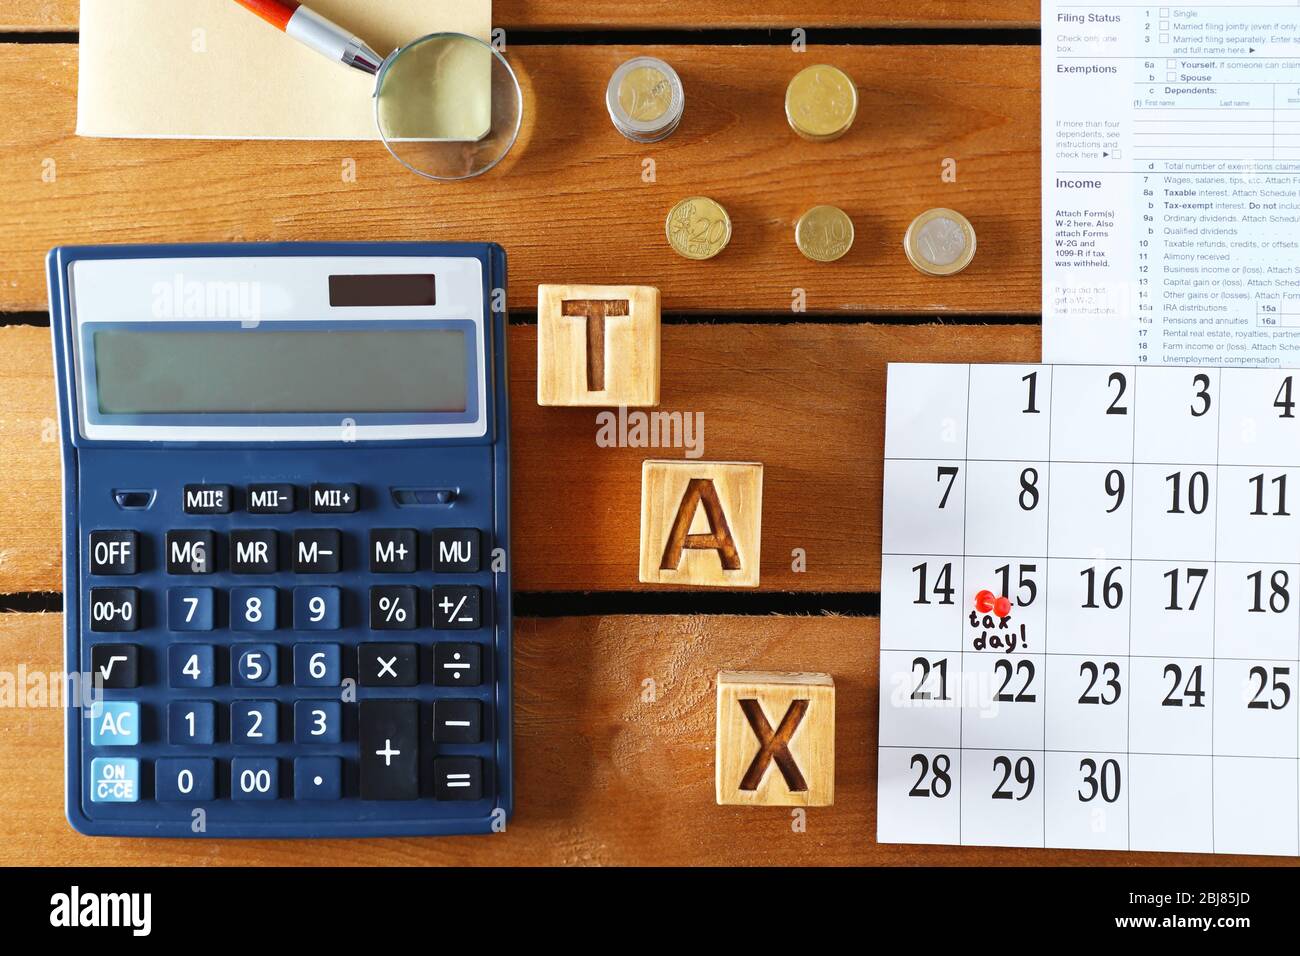 Individual income tax return, calculator and notebook on wooden background  Stock Photo - Alamy